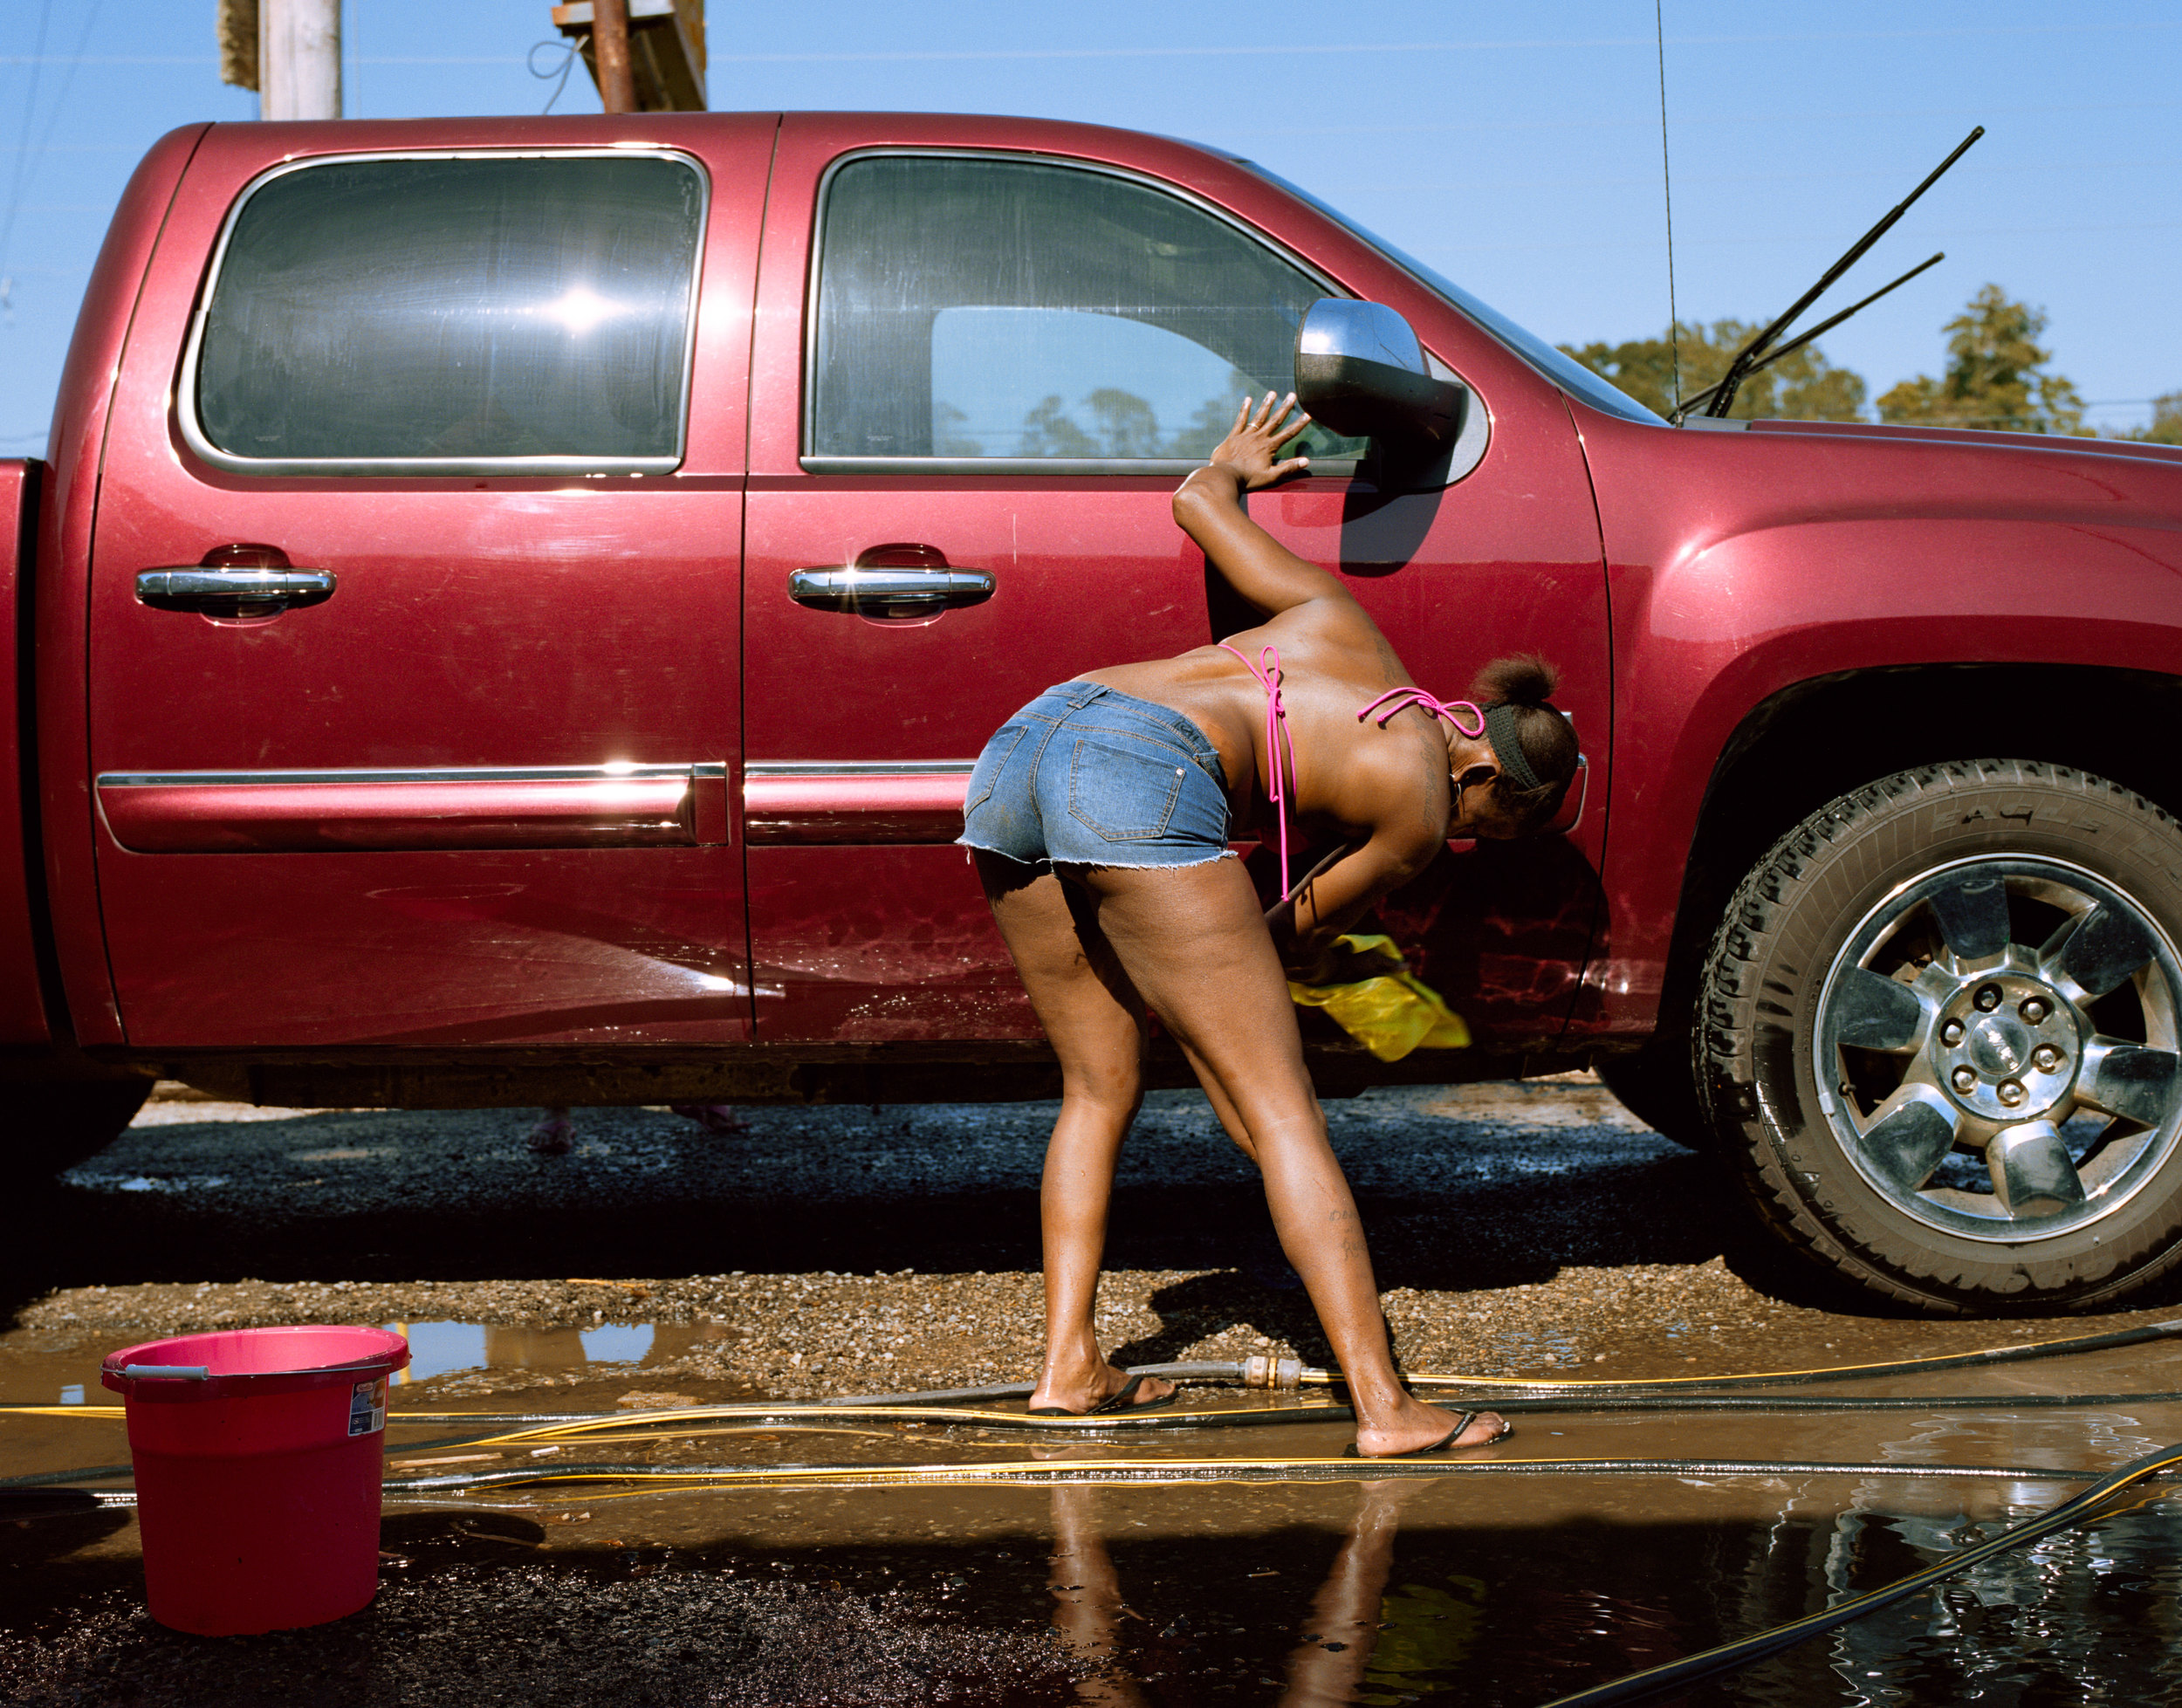 Lifted Trucks And Naked Girls